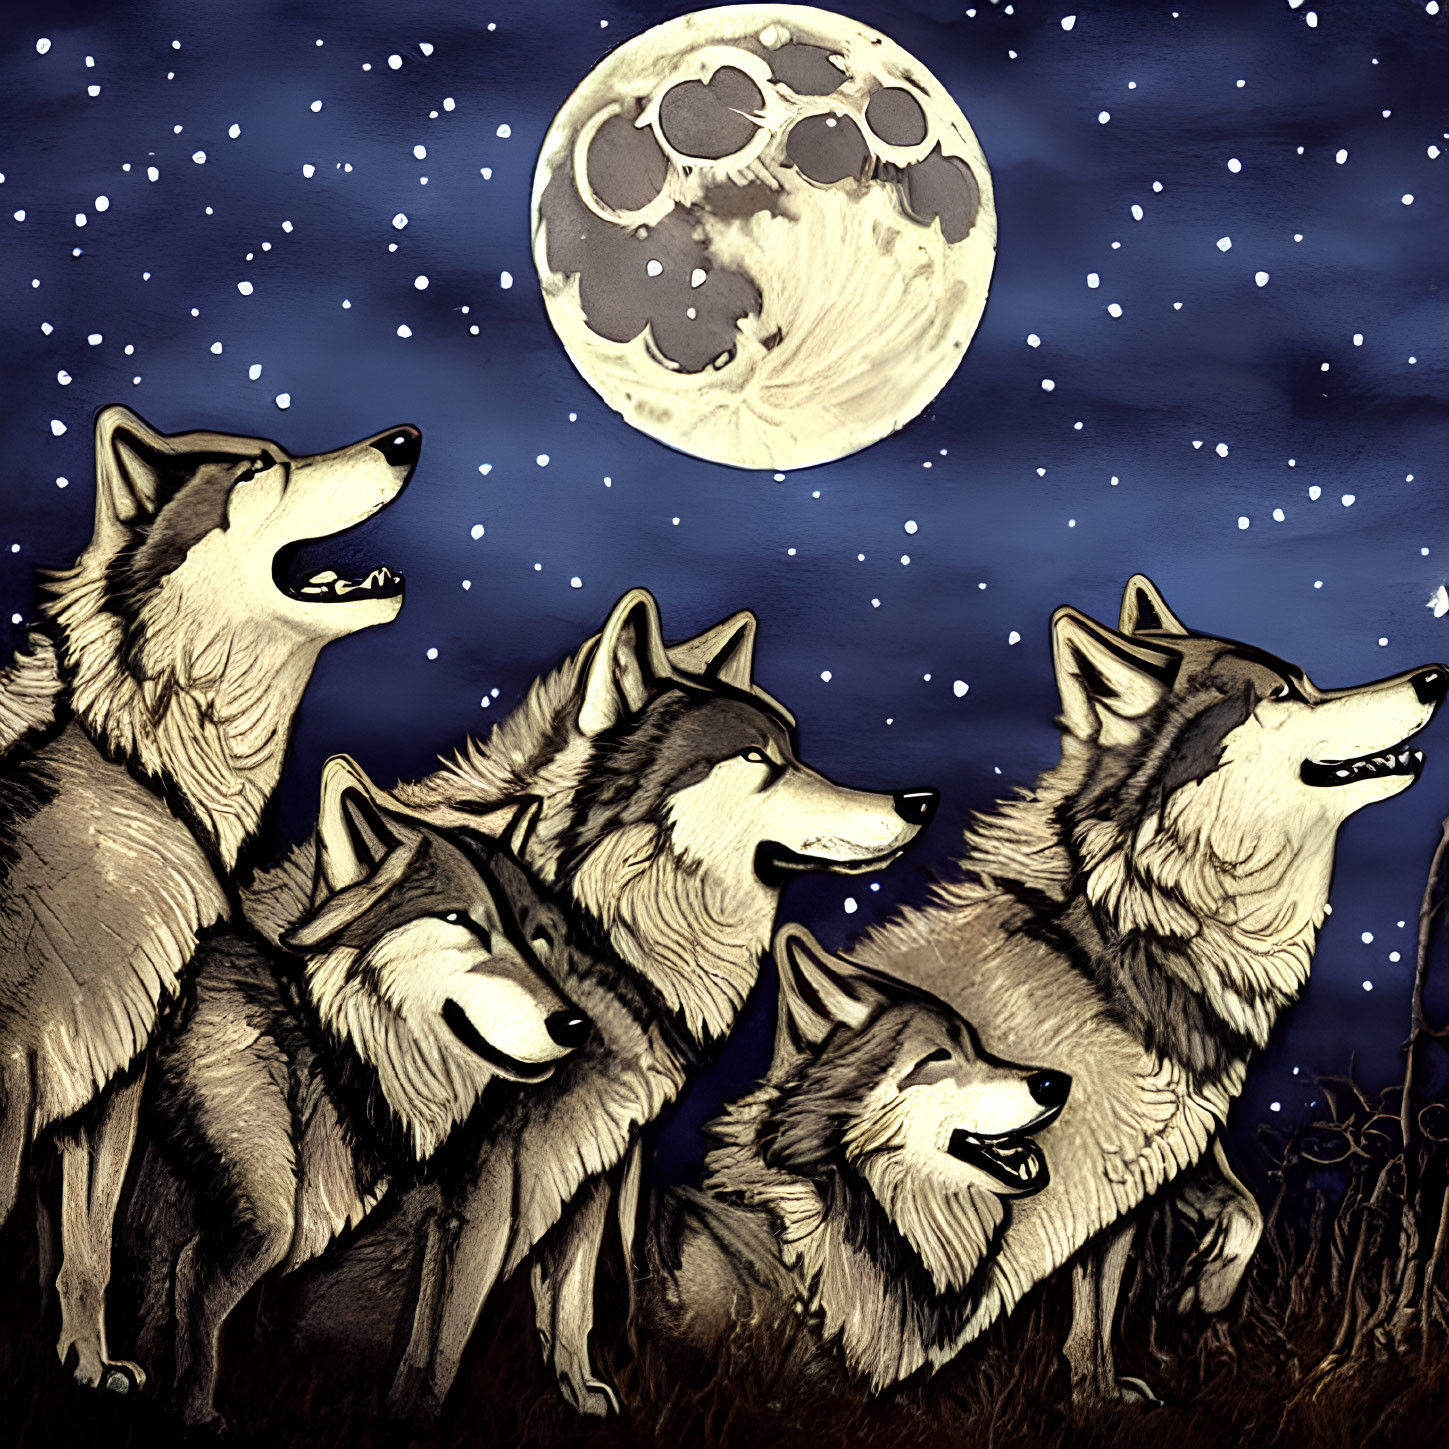 Pack of wolves howling under full moon in starry night sky